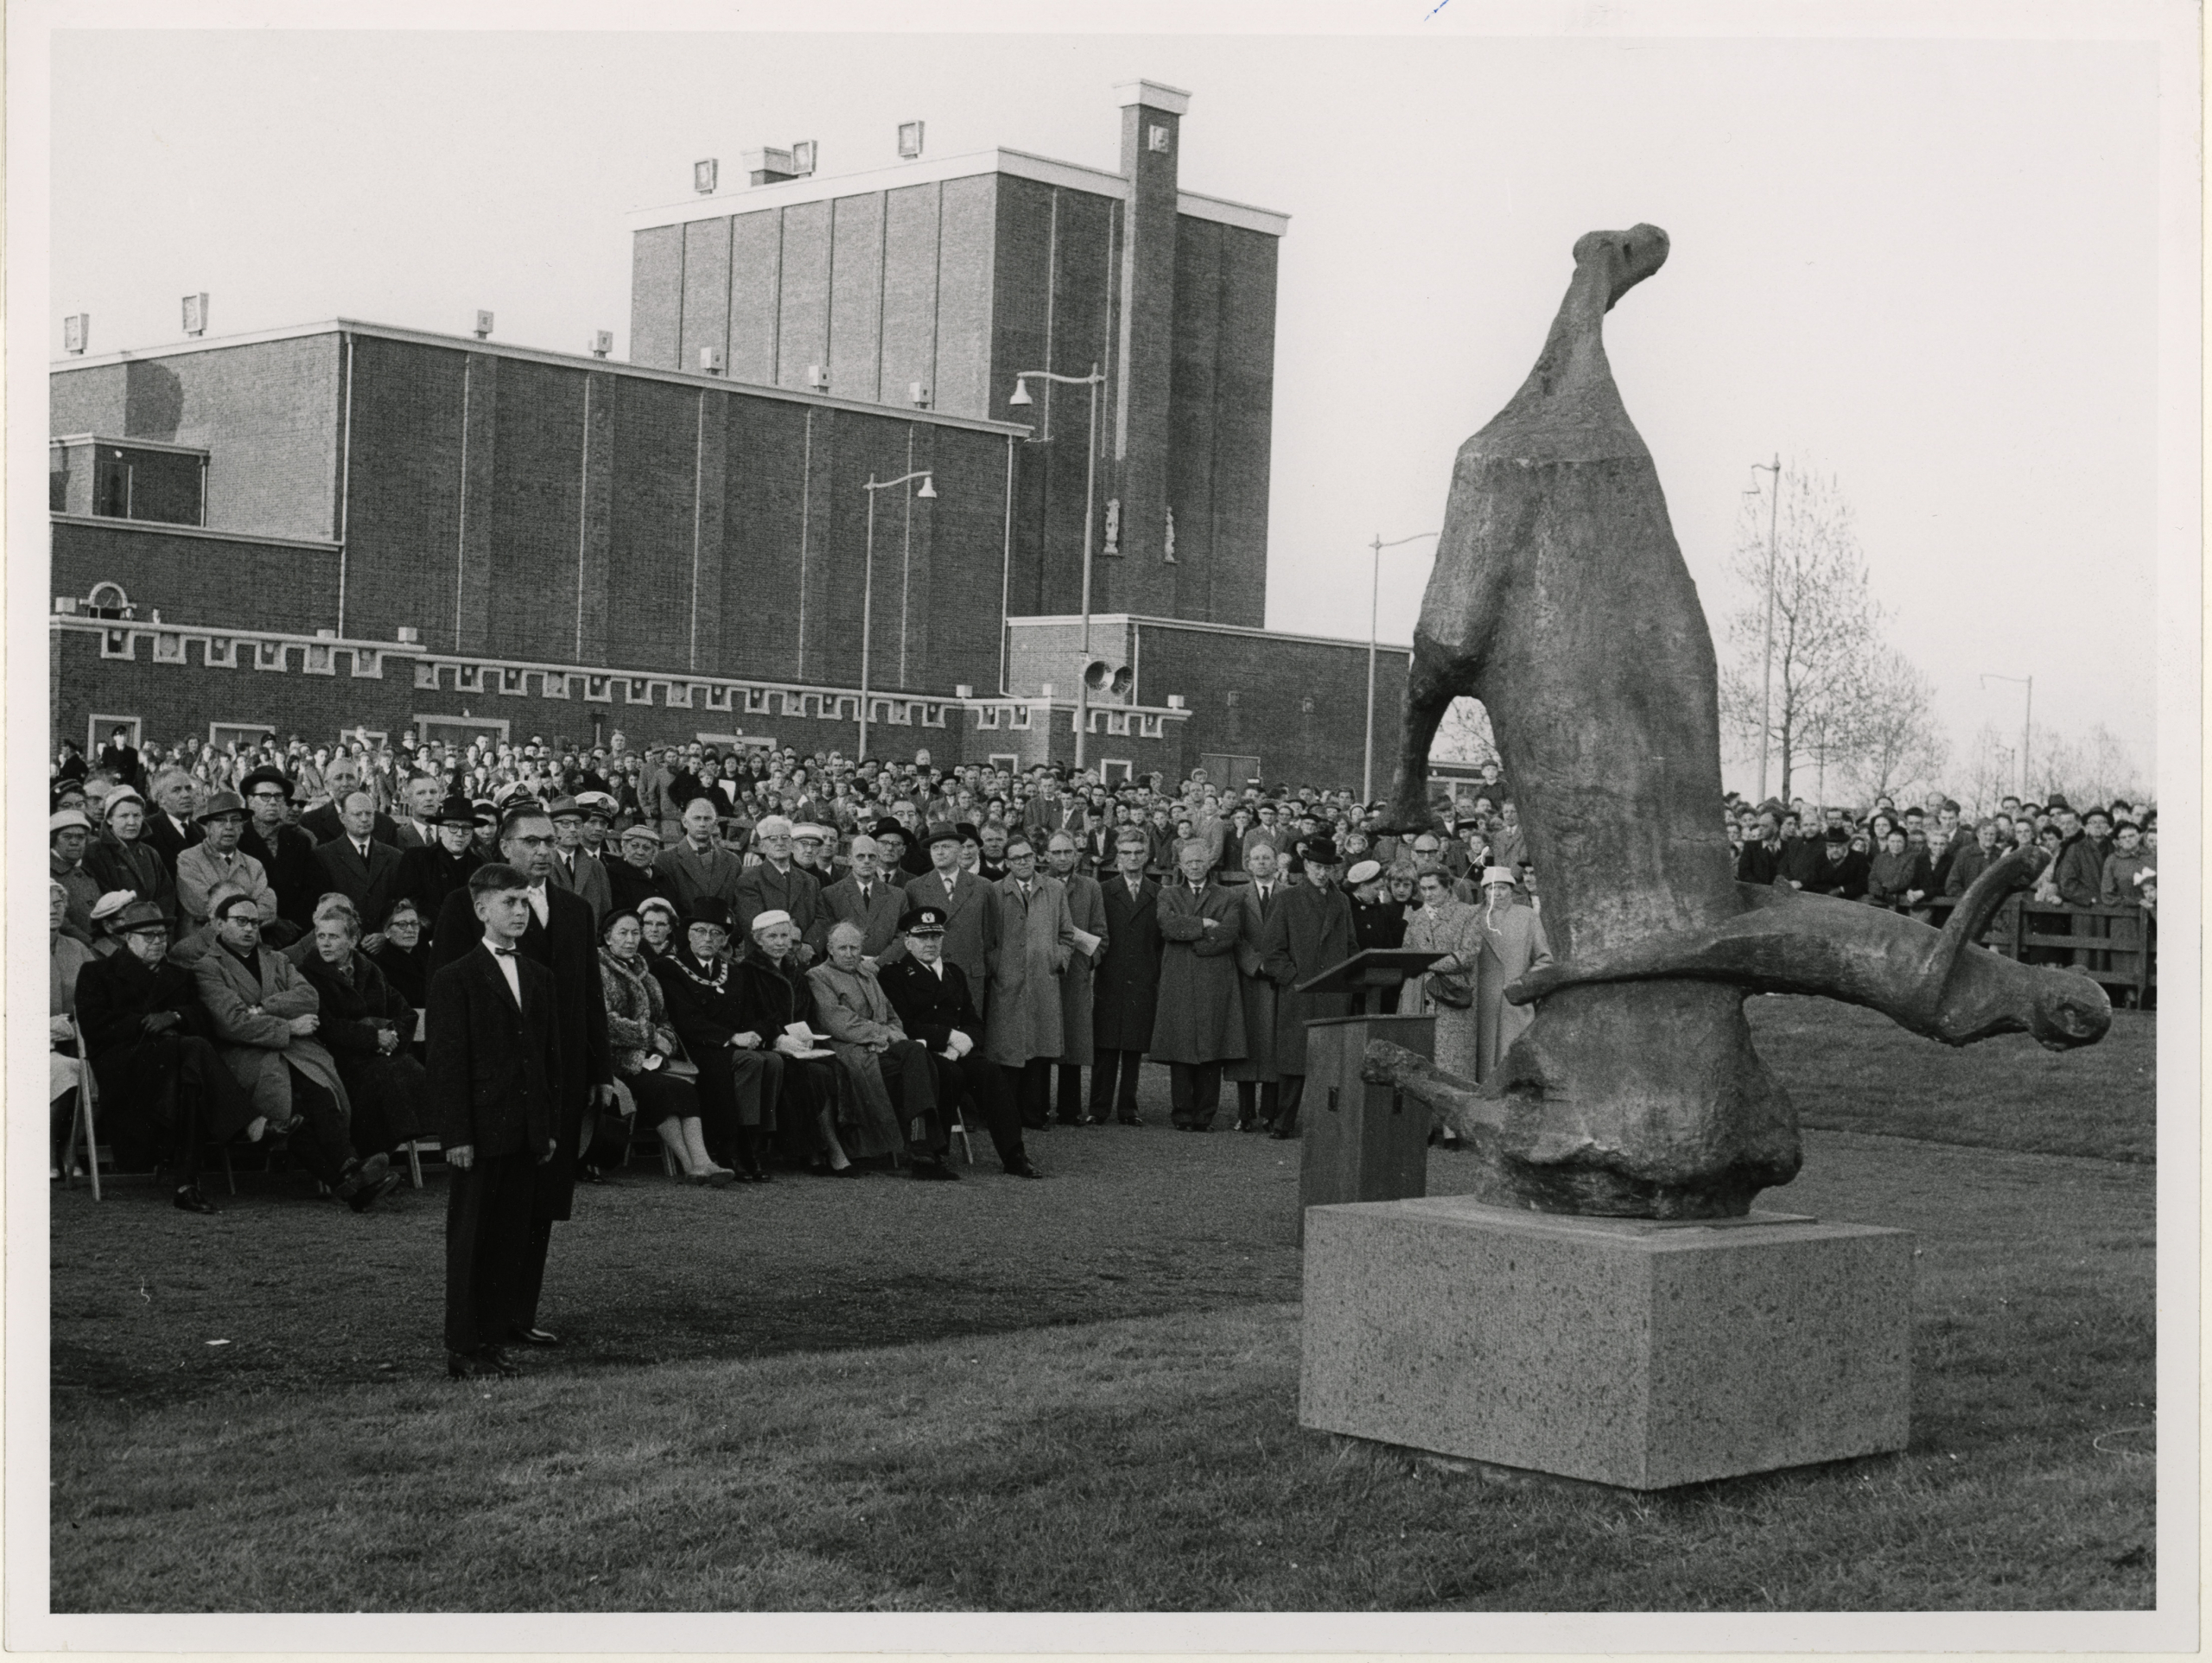 On 3 May 1958, during the remembrance of the dead on Zuidplein, the memorial was unveiled by Frans Lam, son of a executed resistance fighter. Among those present are mayor G.E. van Walsum. Photo Collection Ary Groeneveld - Rotterdam City Archives